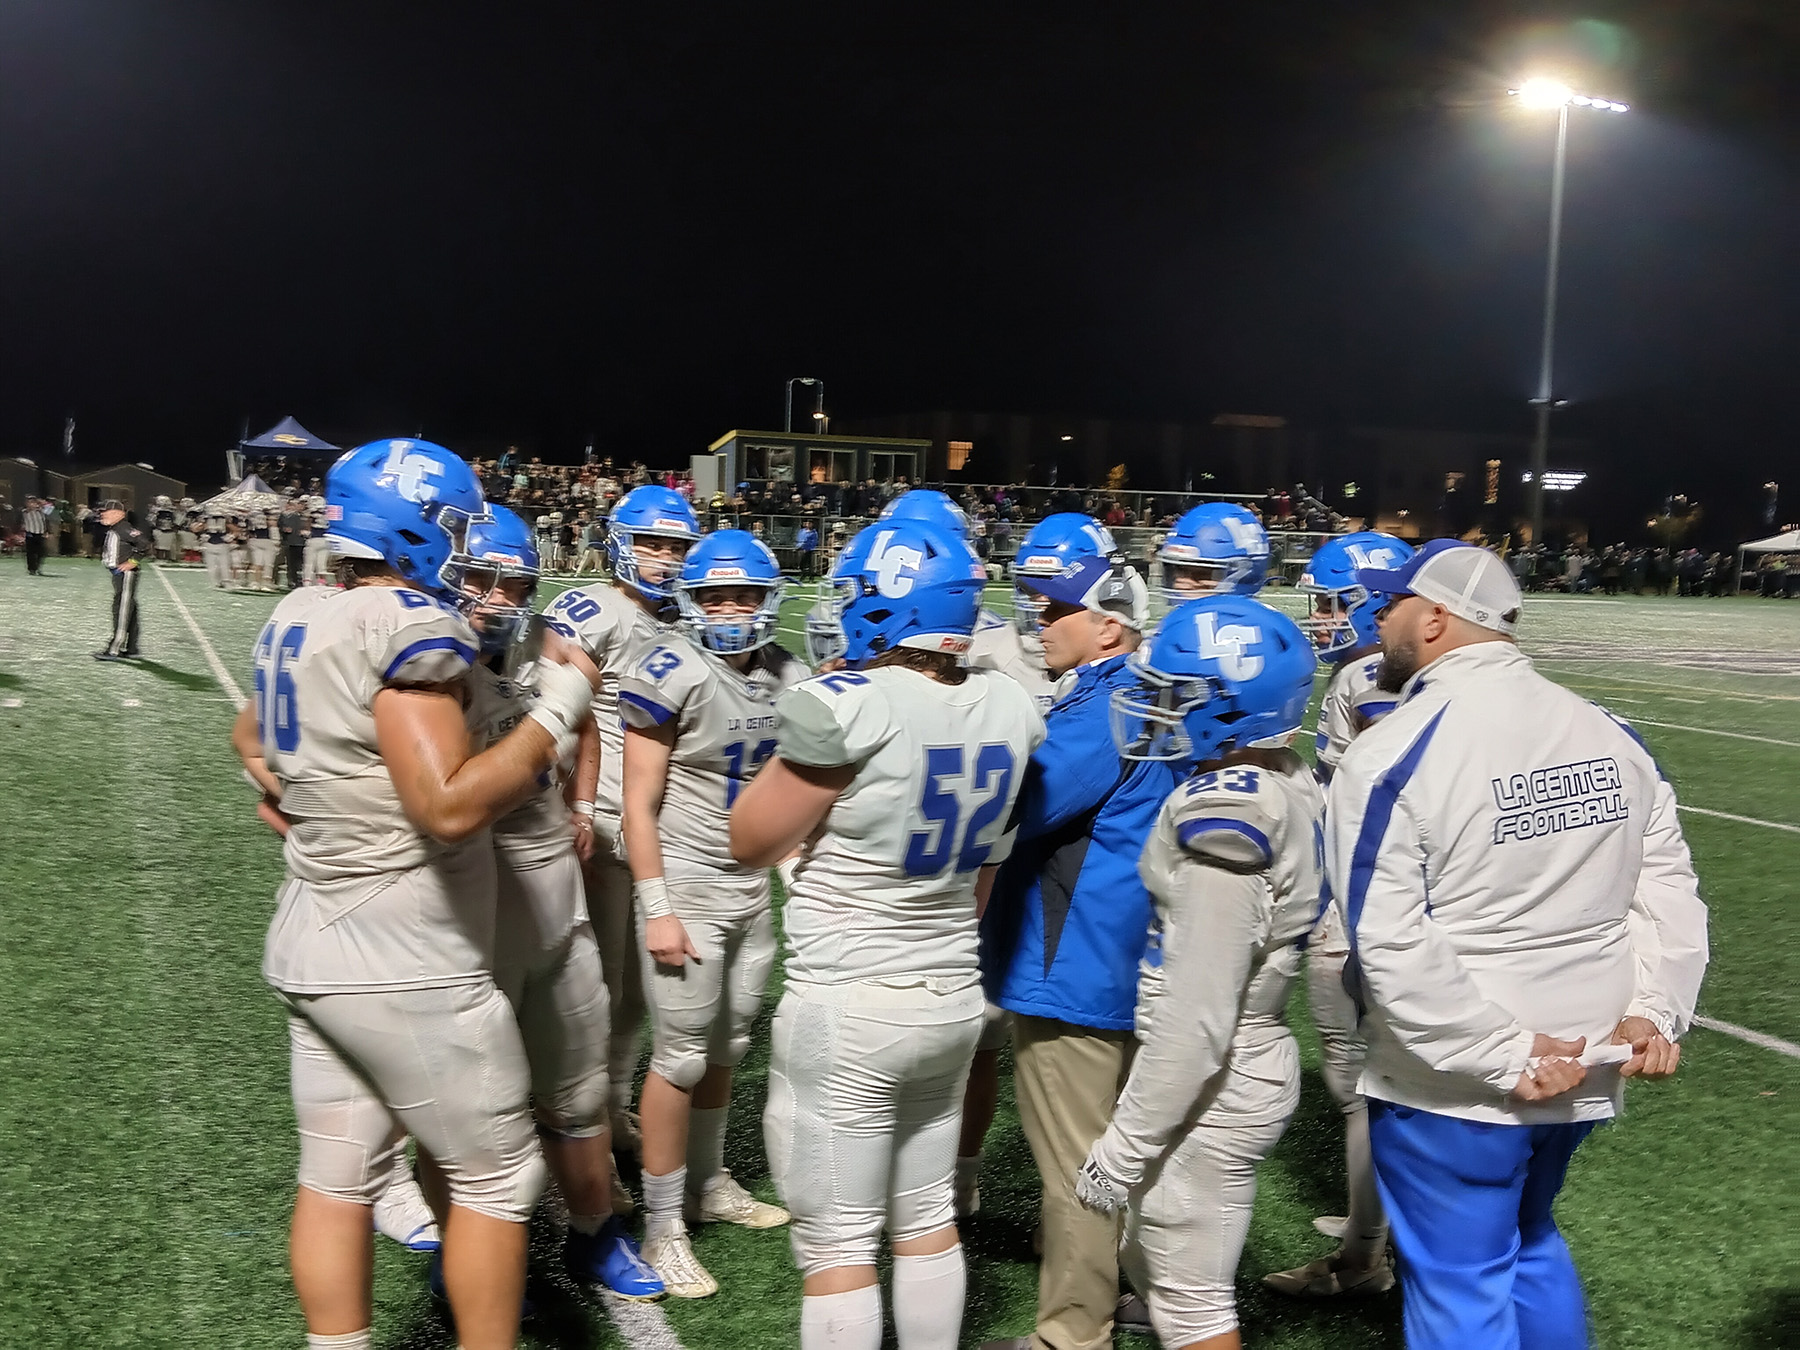 La Center coach John Lambert discussed strategy with his players during a timeout late in the Wildcats' 14-13 win over Seton Catholic (Tim Martinez/The Columbian)